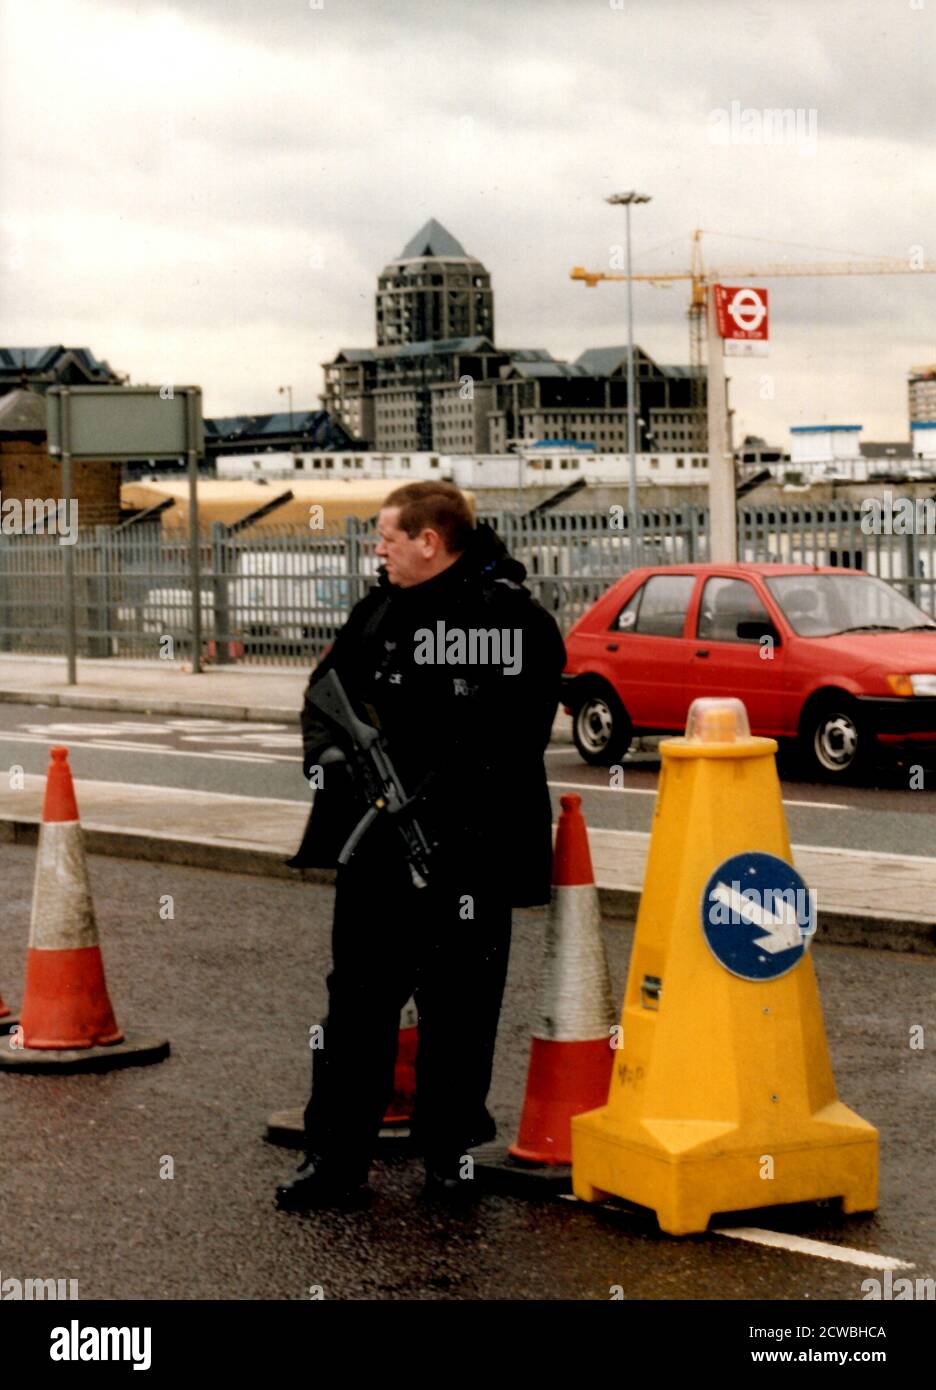 Photograph taken during the aftermath of the London Docklands bombing. The London Docklands bombing (also known as the South Quay bombing or erroneously referred to as the Canary Wharf bombing) occurred on 9 February 1996, when the Provisional Irish Republican Army (IRA) detonated a powerful truck bomb in South Quay (which is outside Canary Wharf). Stock Photo